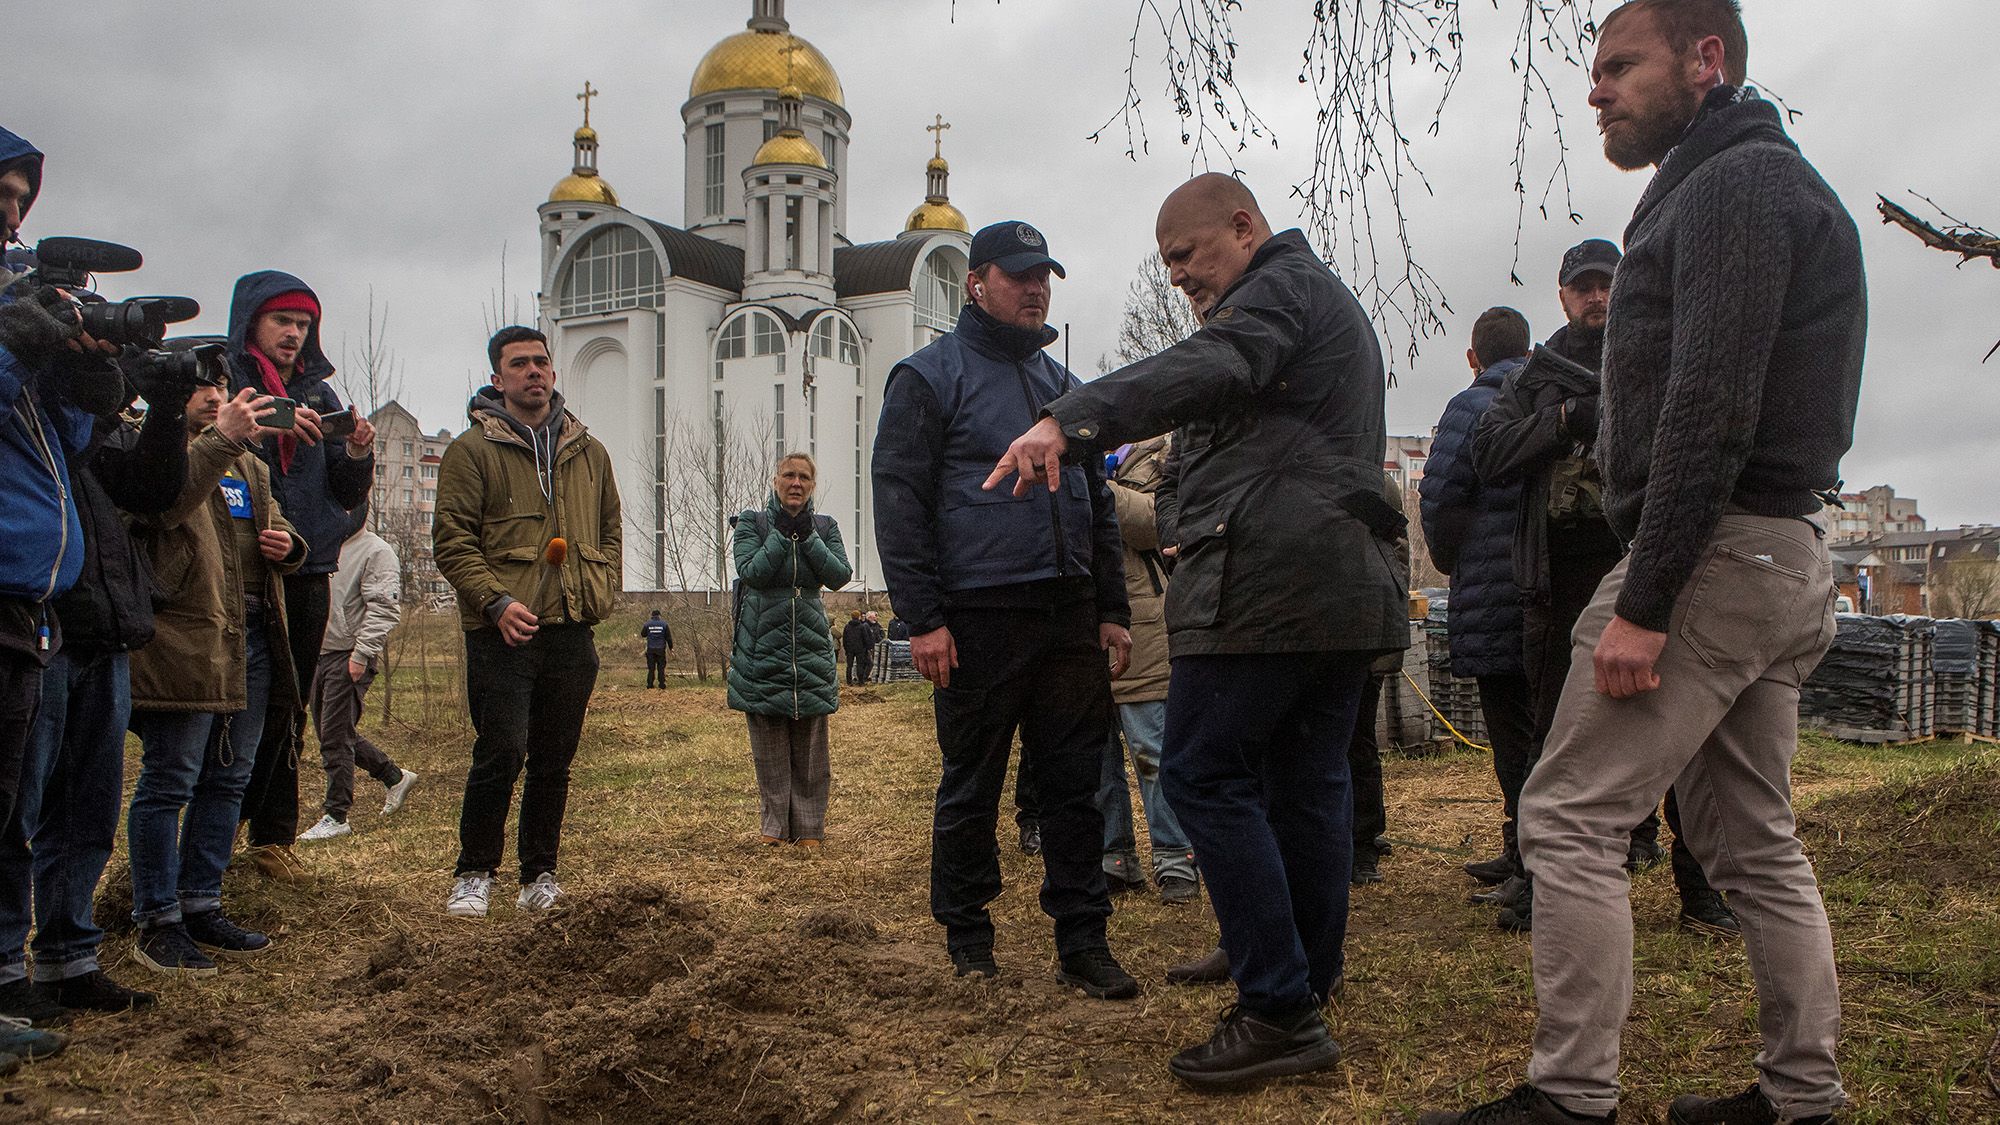 International Criminal Court (ICC) Prosecutor Karim Khan stands next to a grave where remains of three bodies were found, in the town of Bucha, Ukraine on April 13.